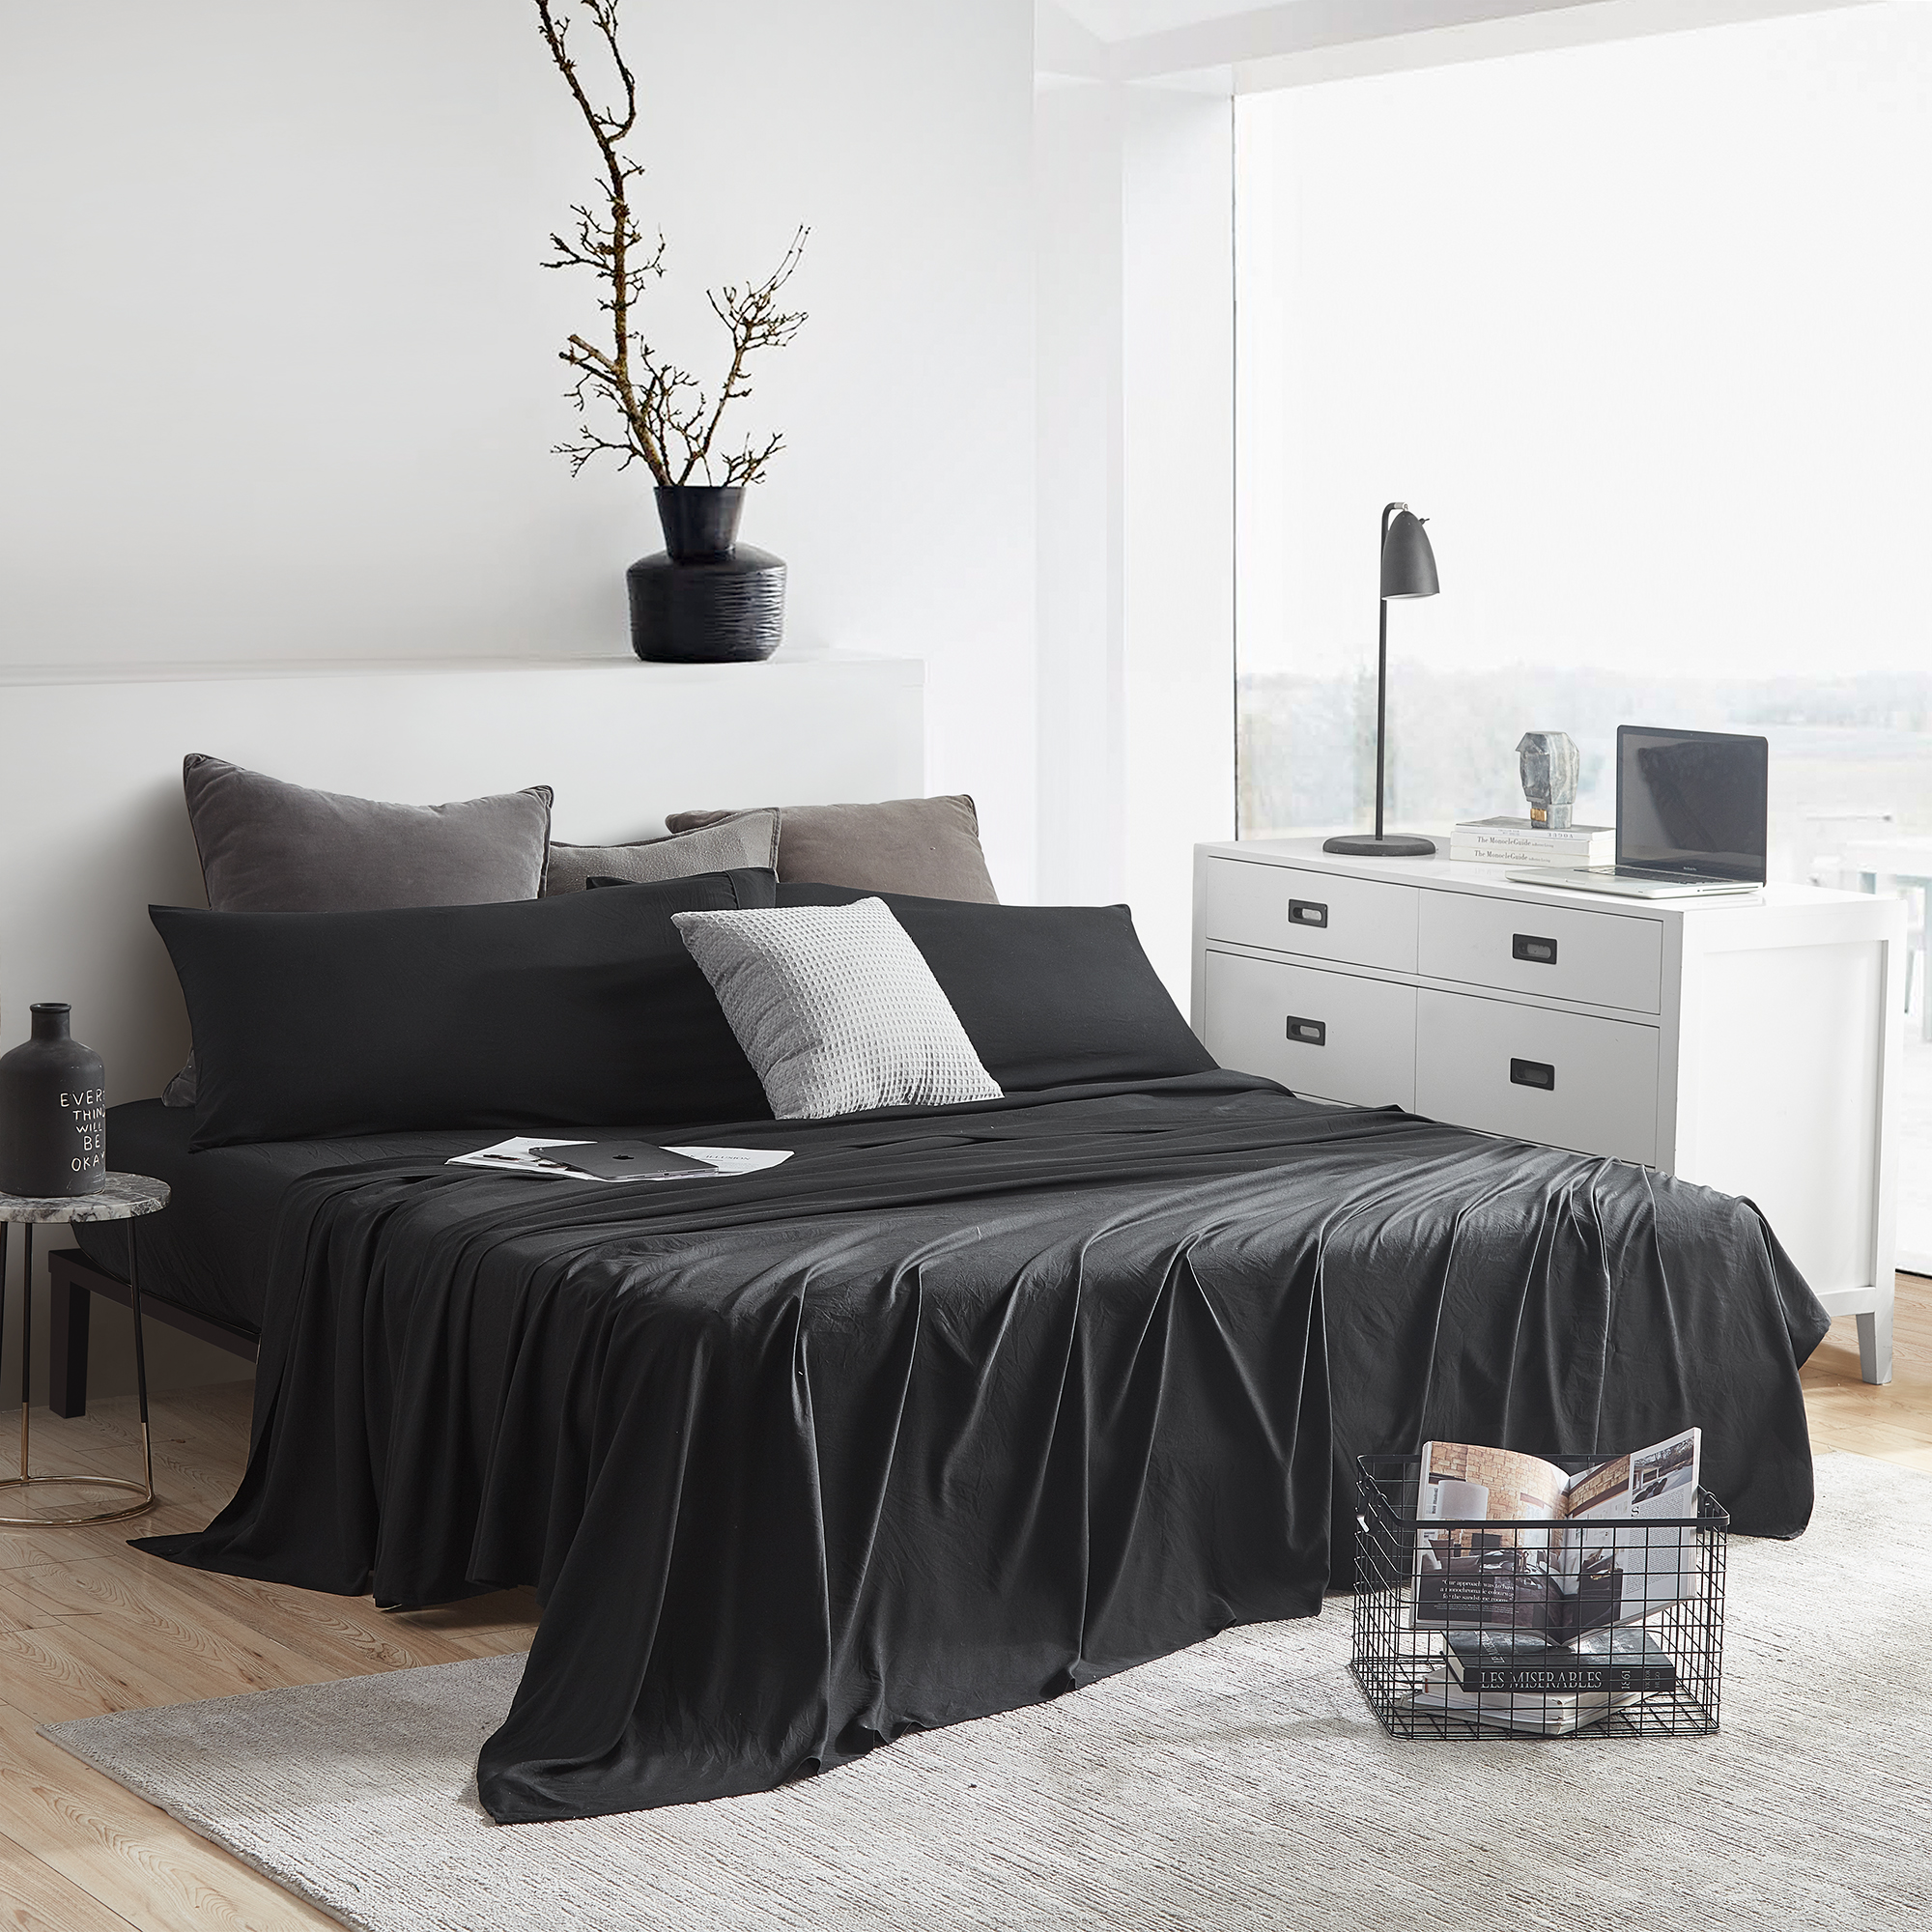 Luxury for Less Affordable High Quality Sheets for Twin Extra Large, Queen, or King Sized Mattresses